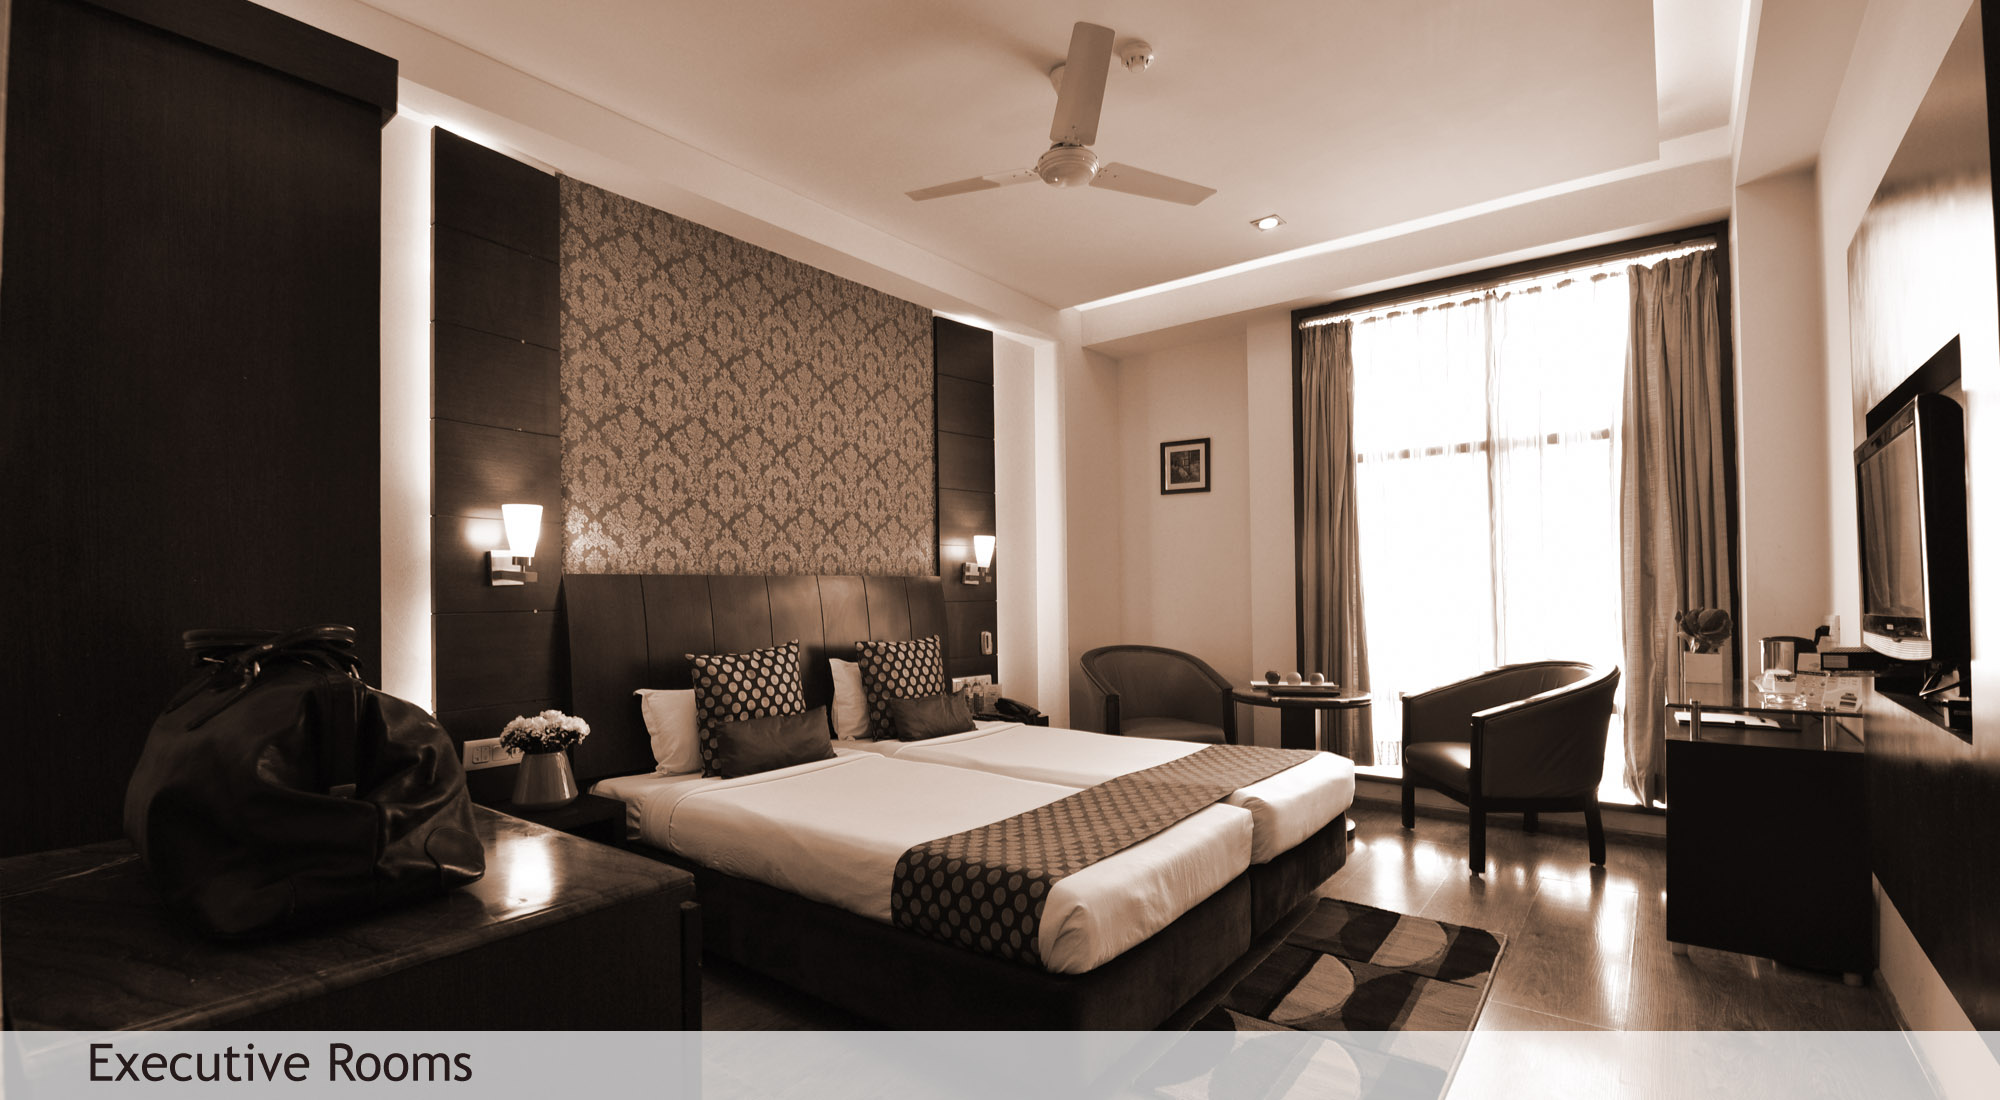 contemporary style and luxury rooms in kota